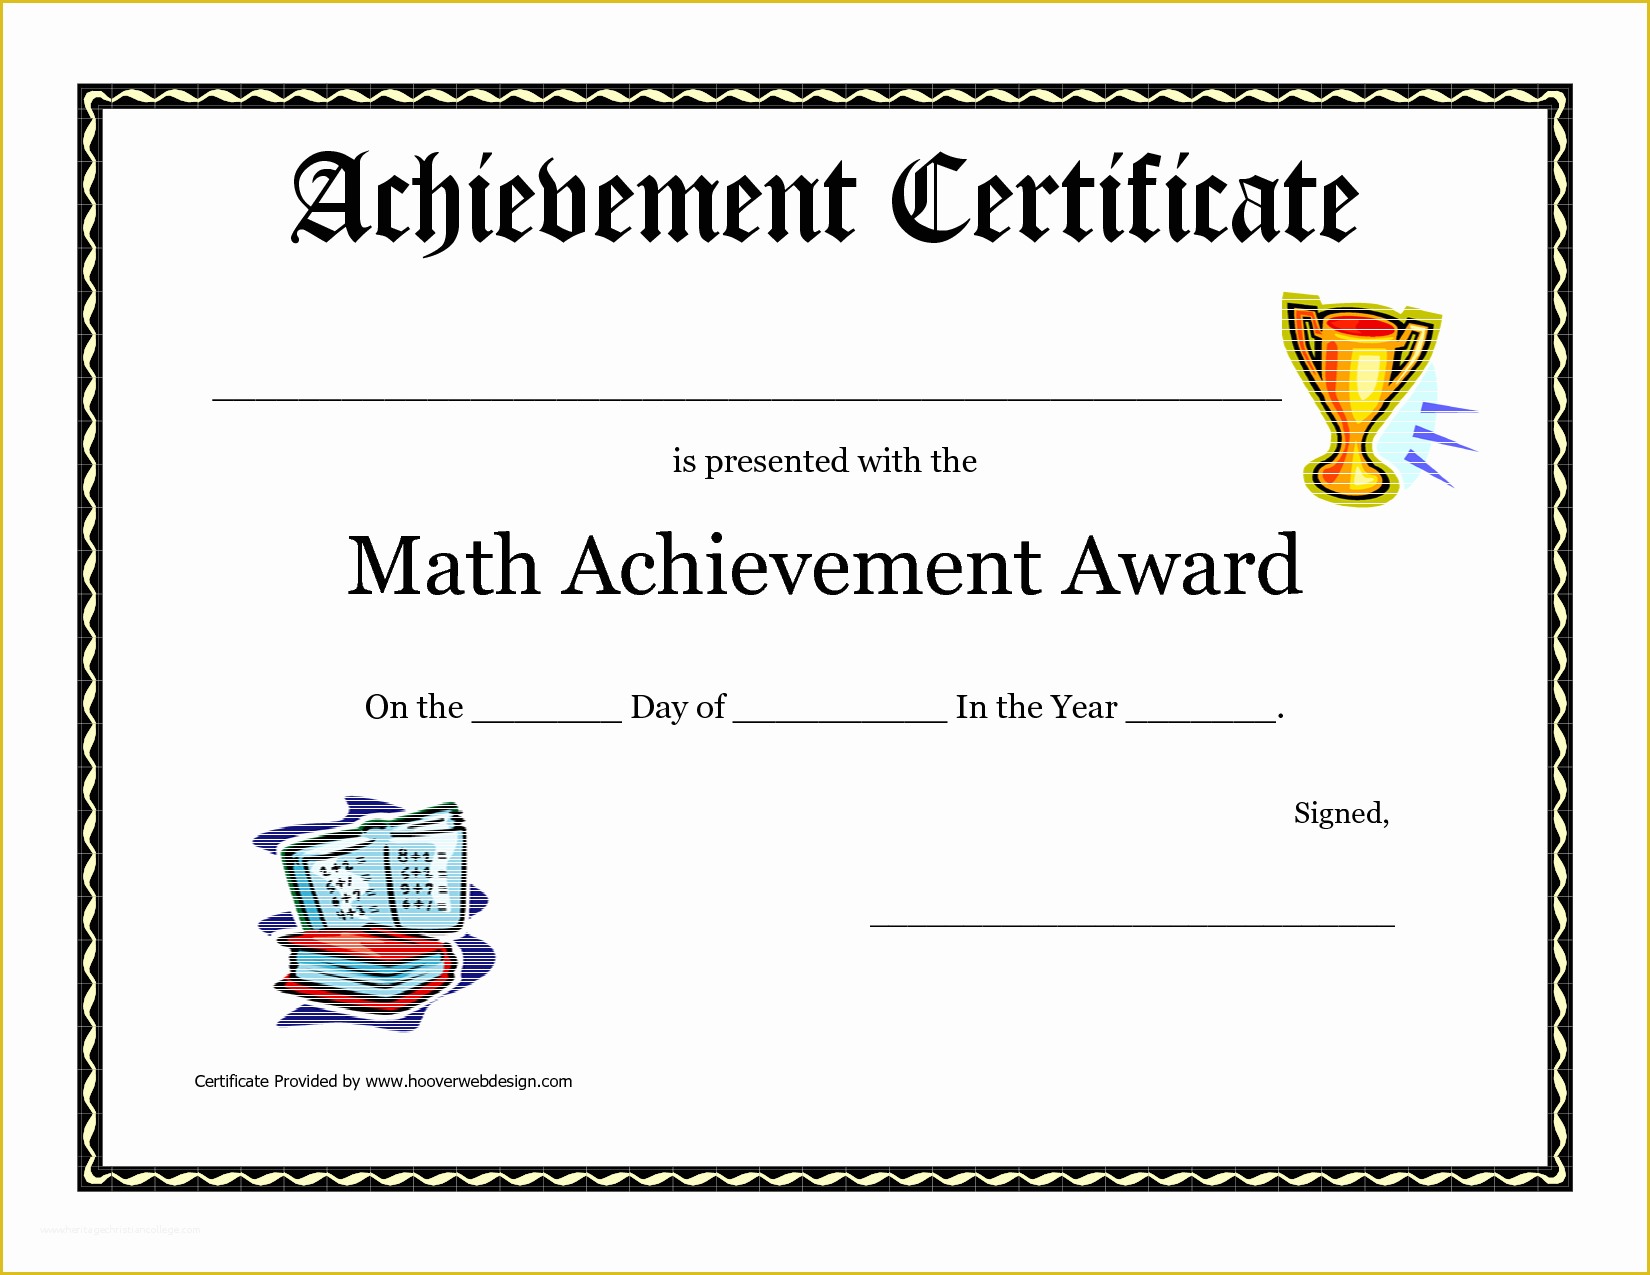 Free School Award Certificate Templates Of Acheive Printable Student Awards